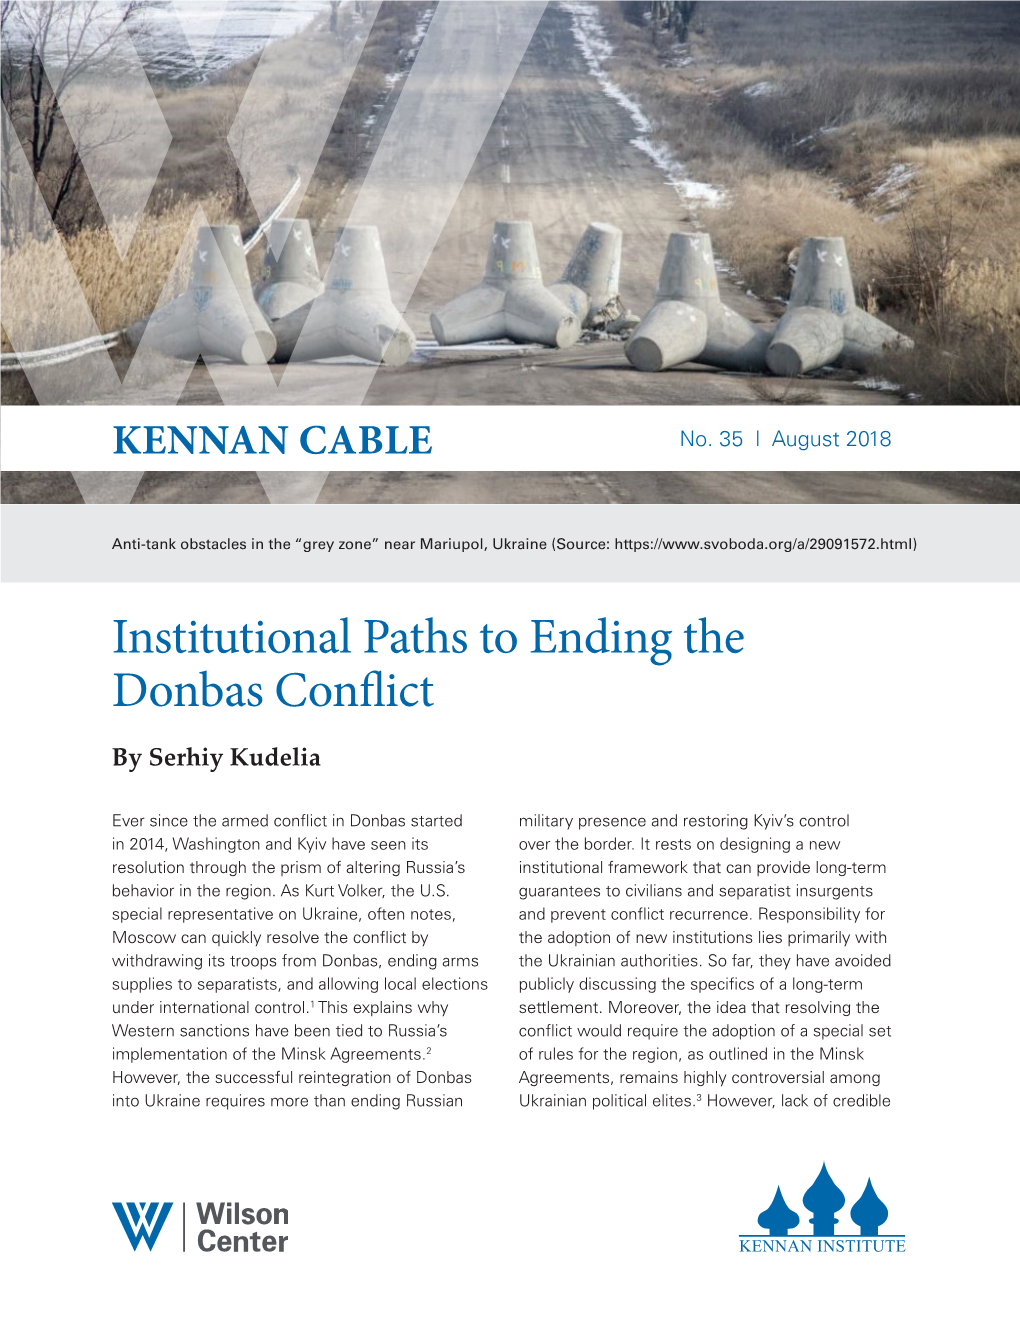 Institutional Paths to Ending the Donbas Conflict by Serhiy Kudelia